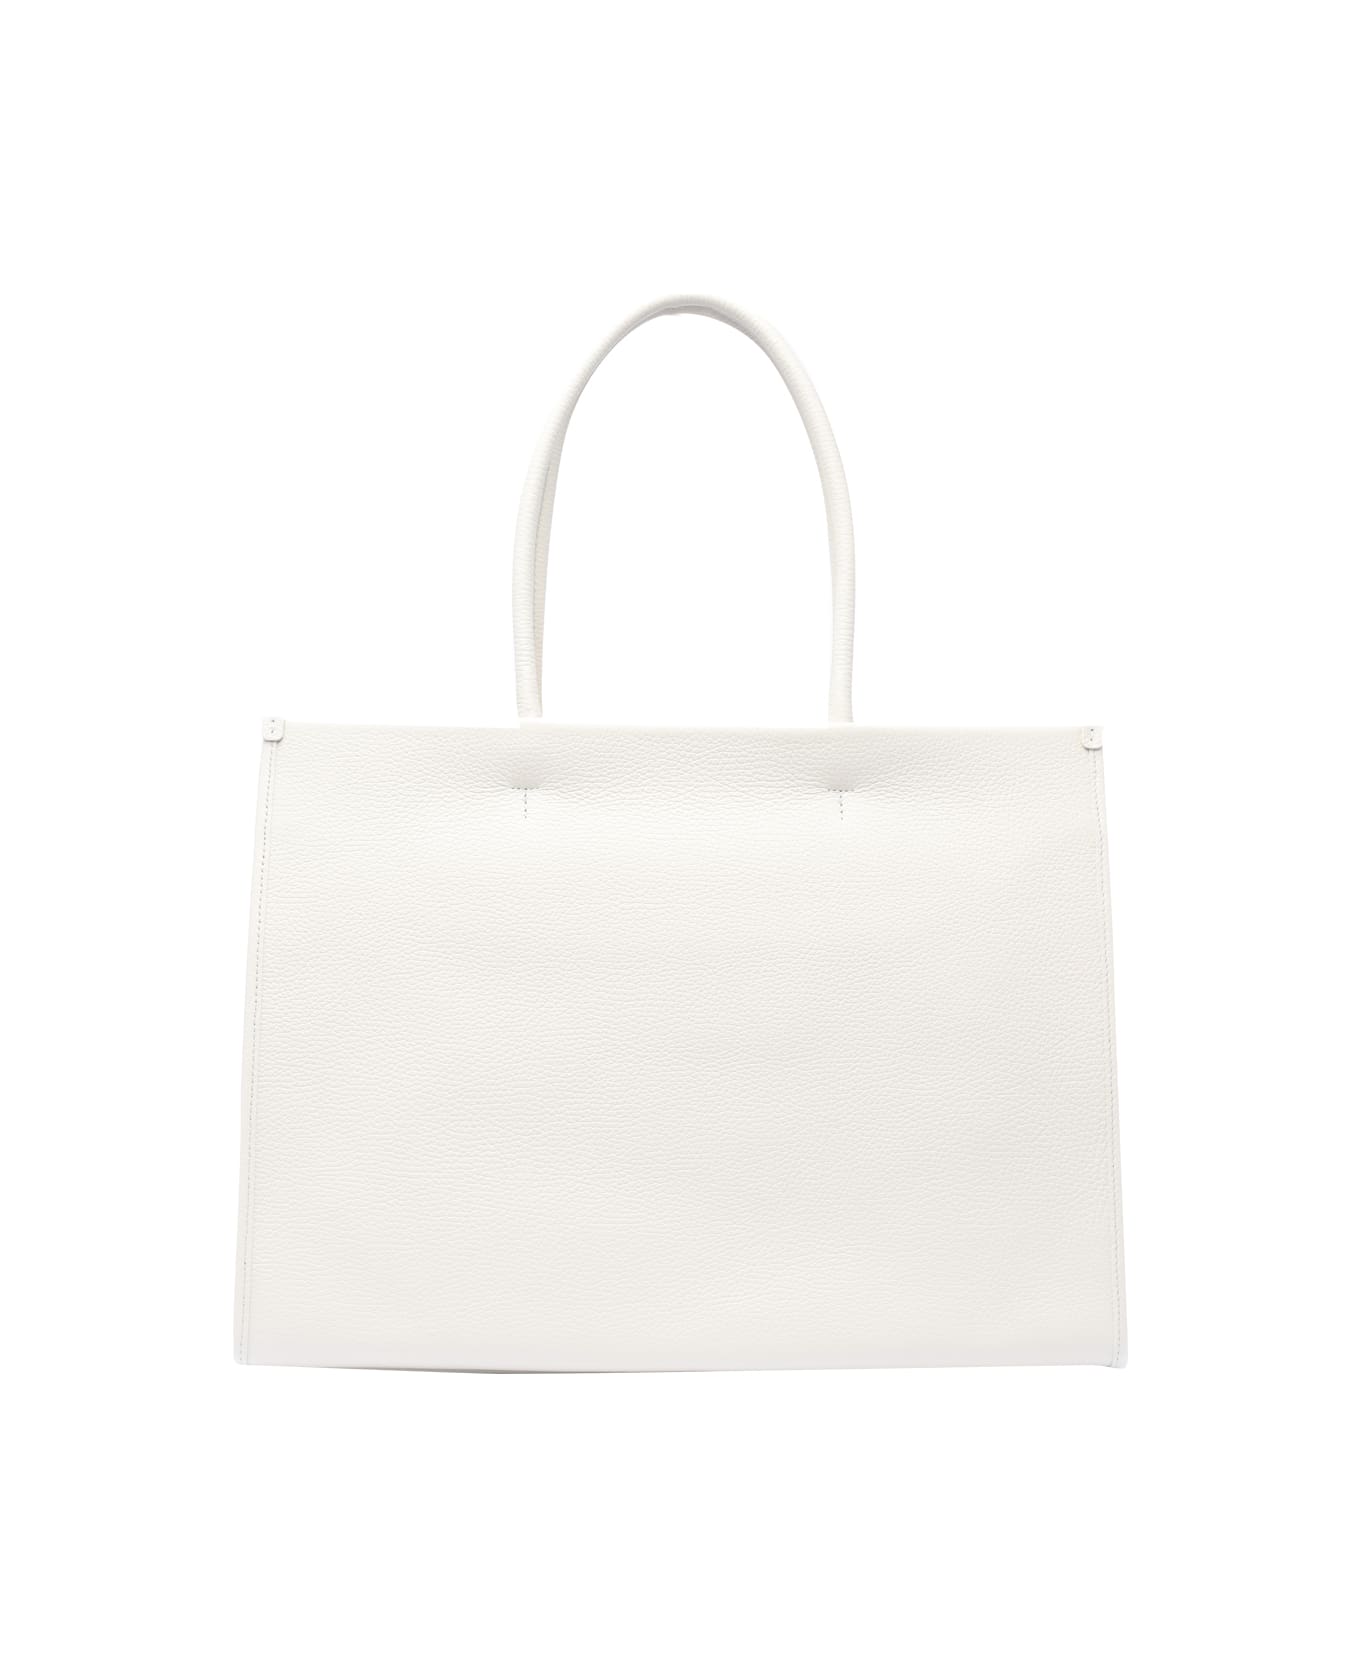 Furla Opportunity Tote Bag - White トートバッグ